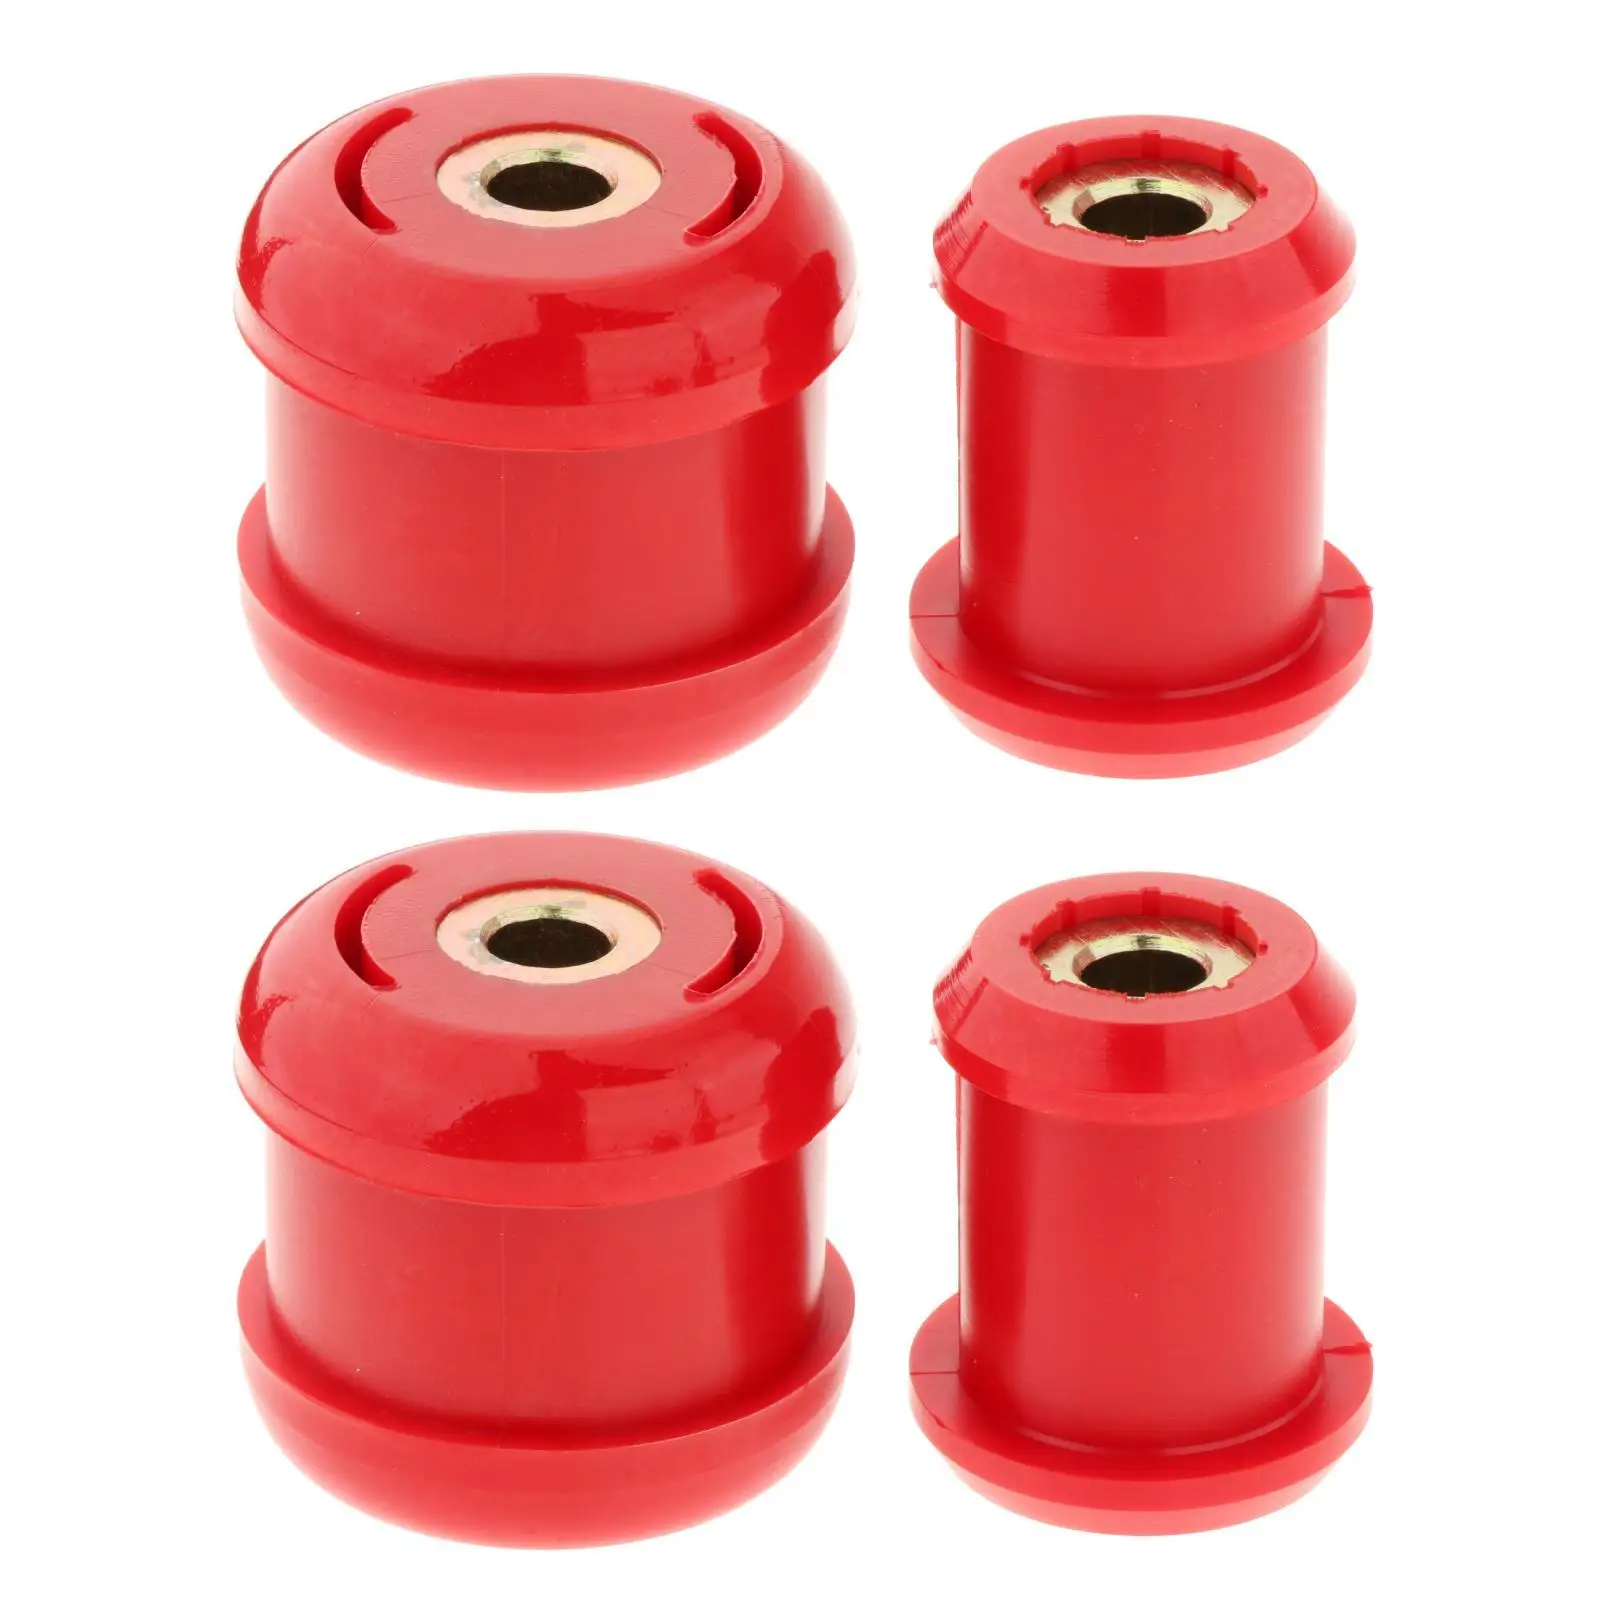 Control Arm Bushing Car Parts Replacement Accessories Fit for Honda Civic 2001-2005